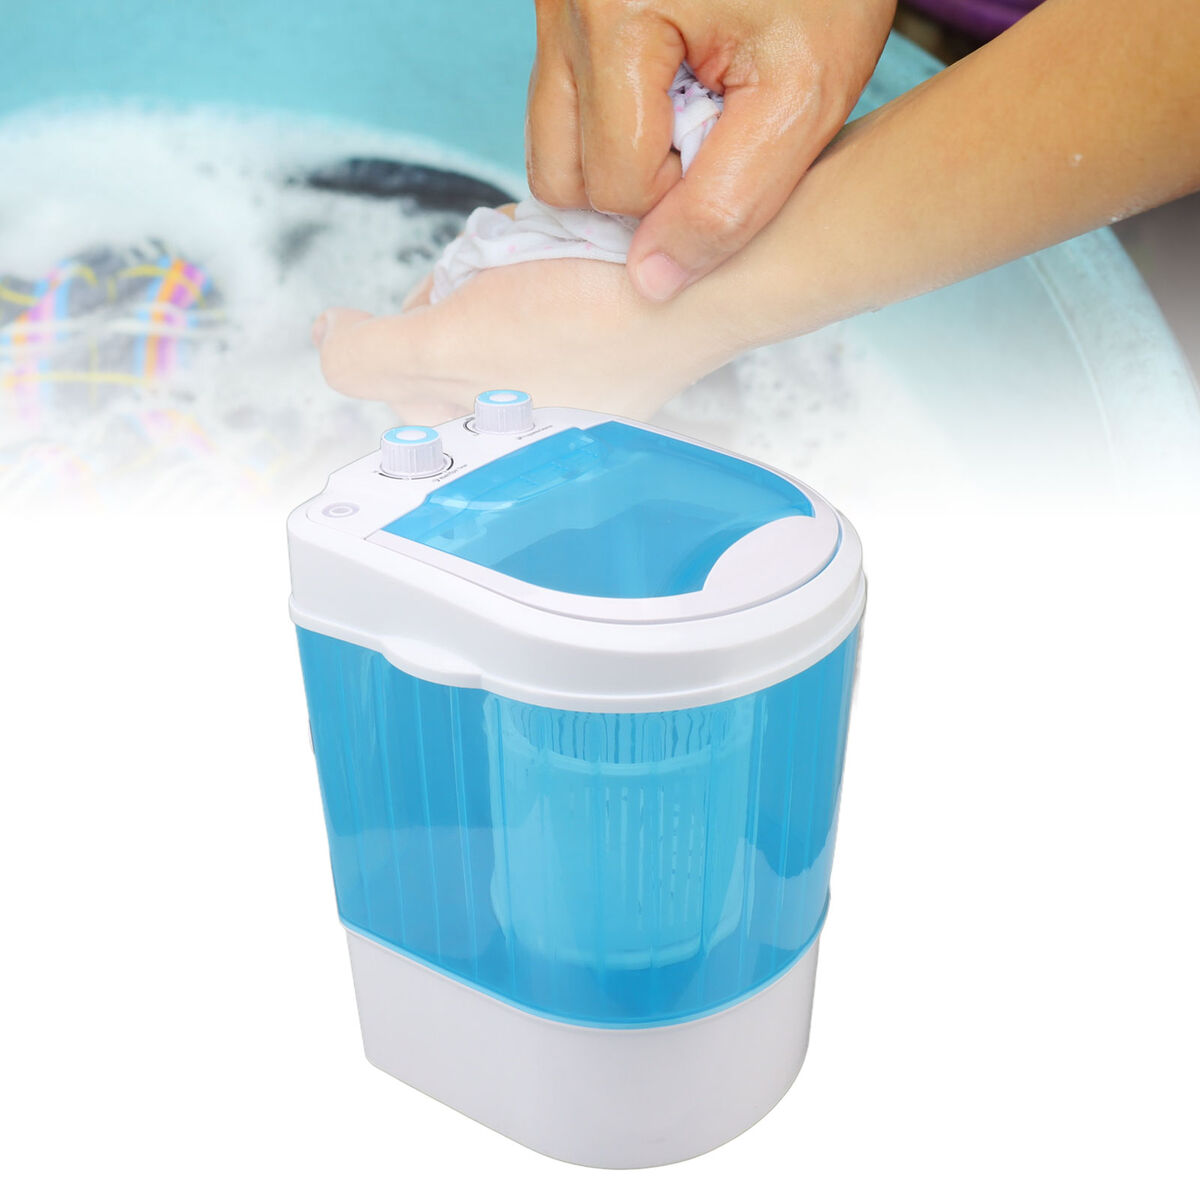 Compact Portable Washing Machine With Spin Cycle For Convenient Travel Use